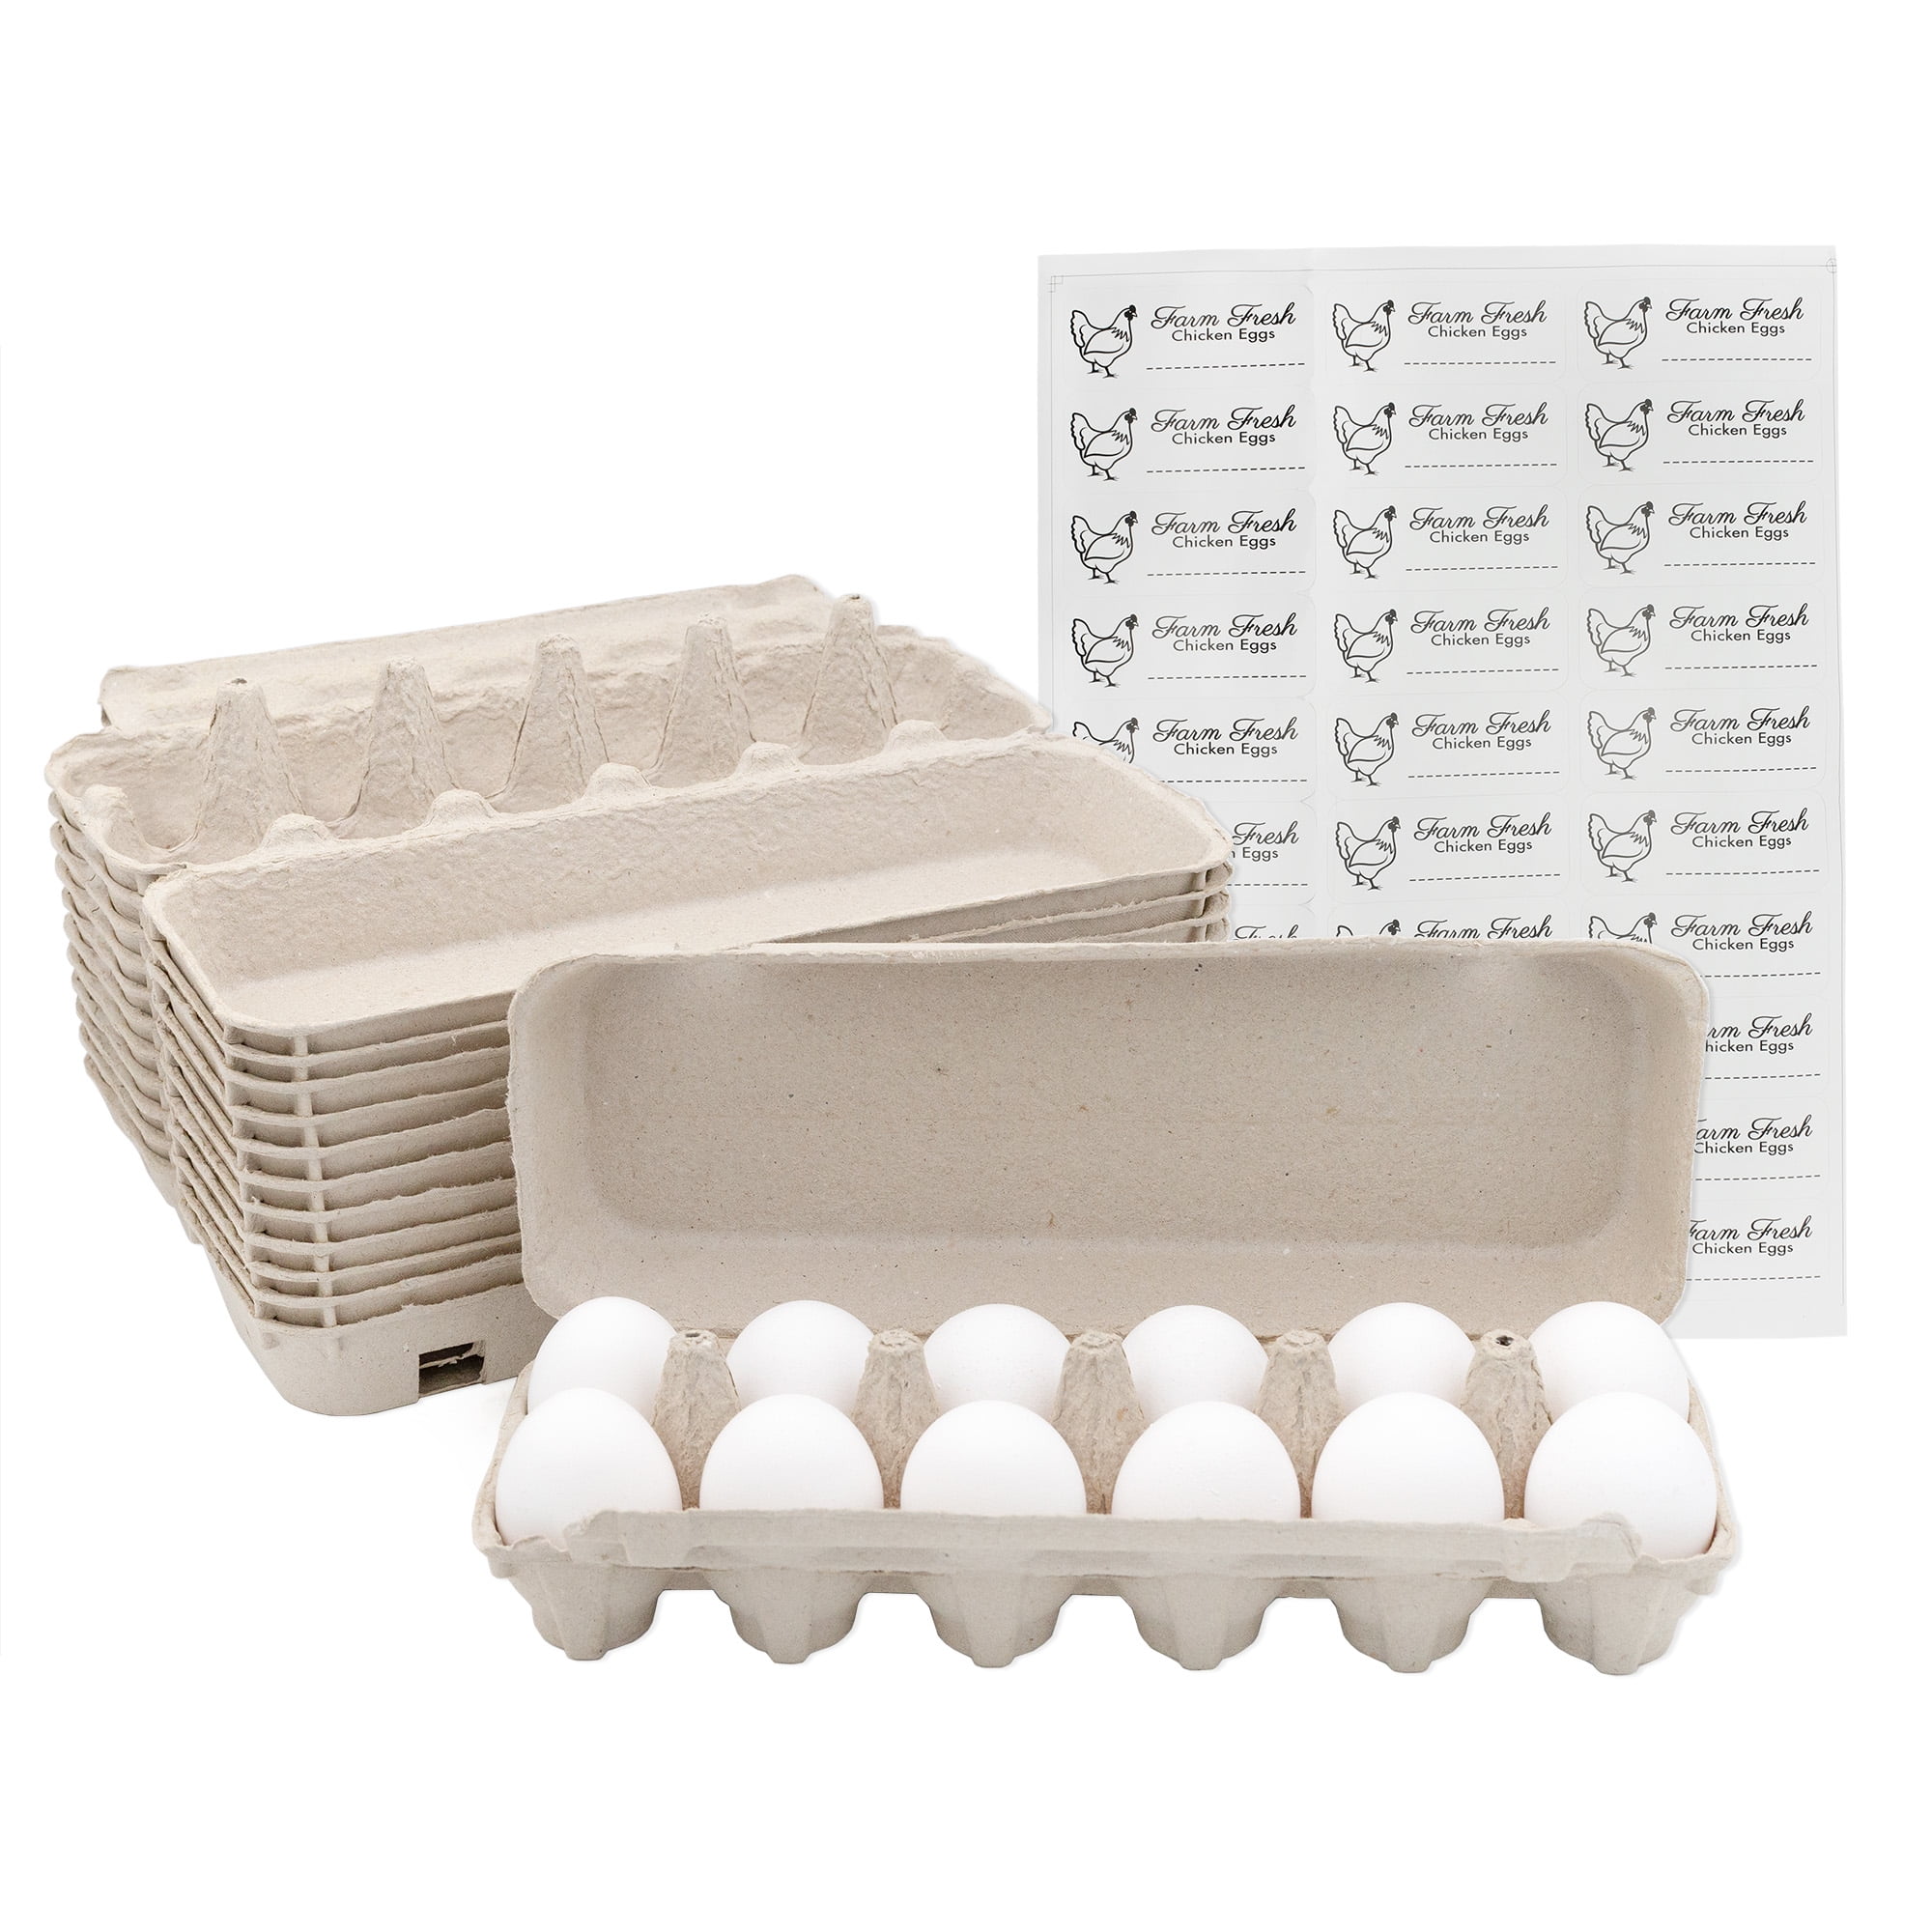 Vibrant Life Egg Cartons, Natural Pulp Paper Material, Holds 12 Eggs 